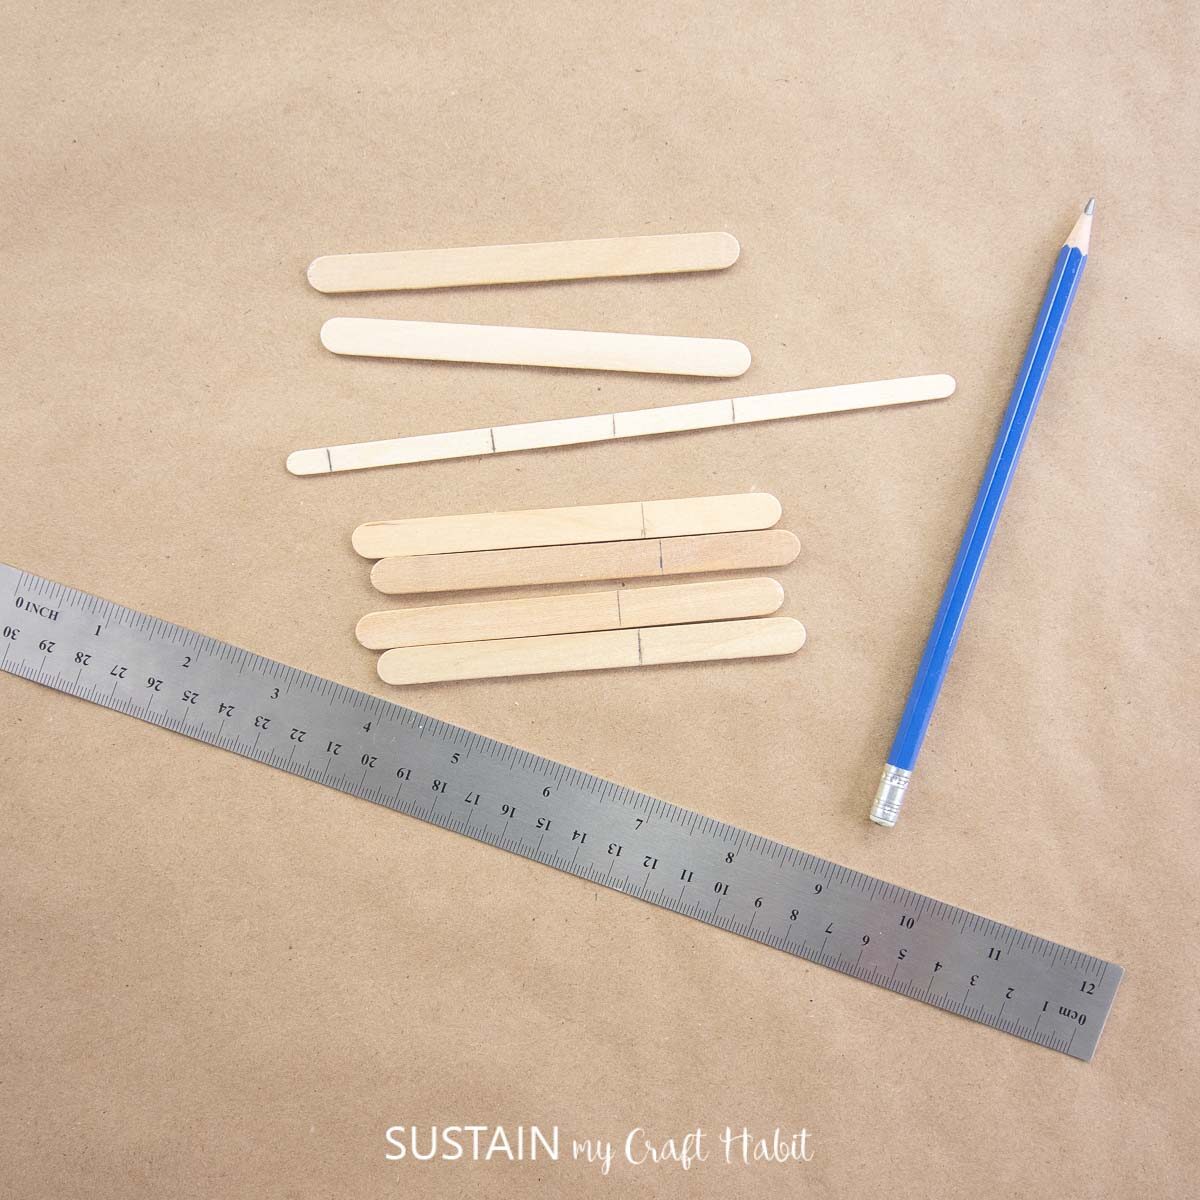 Marking popsicle sticks with a pencil.